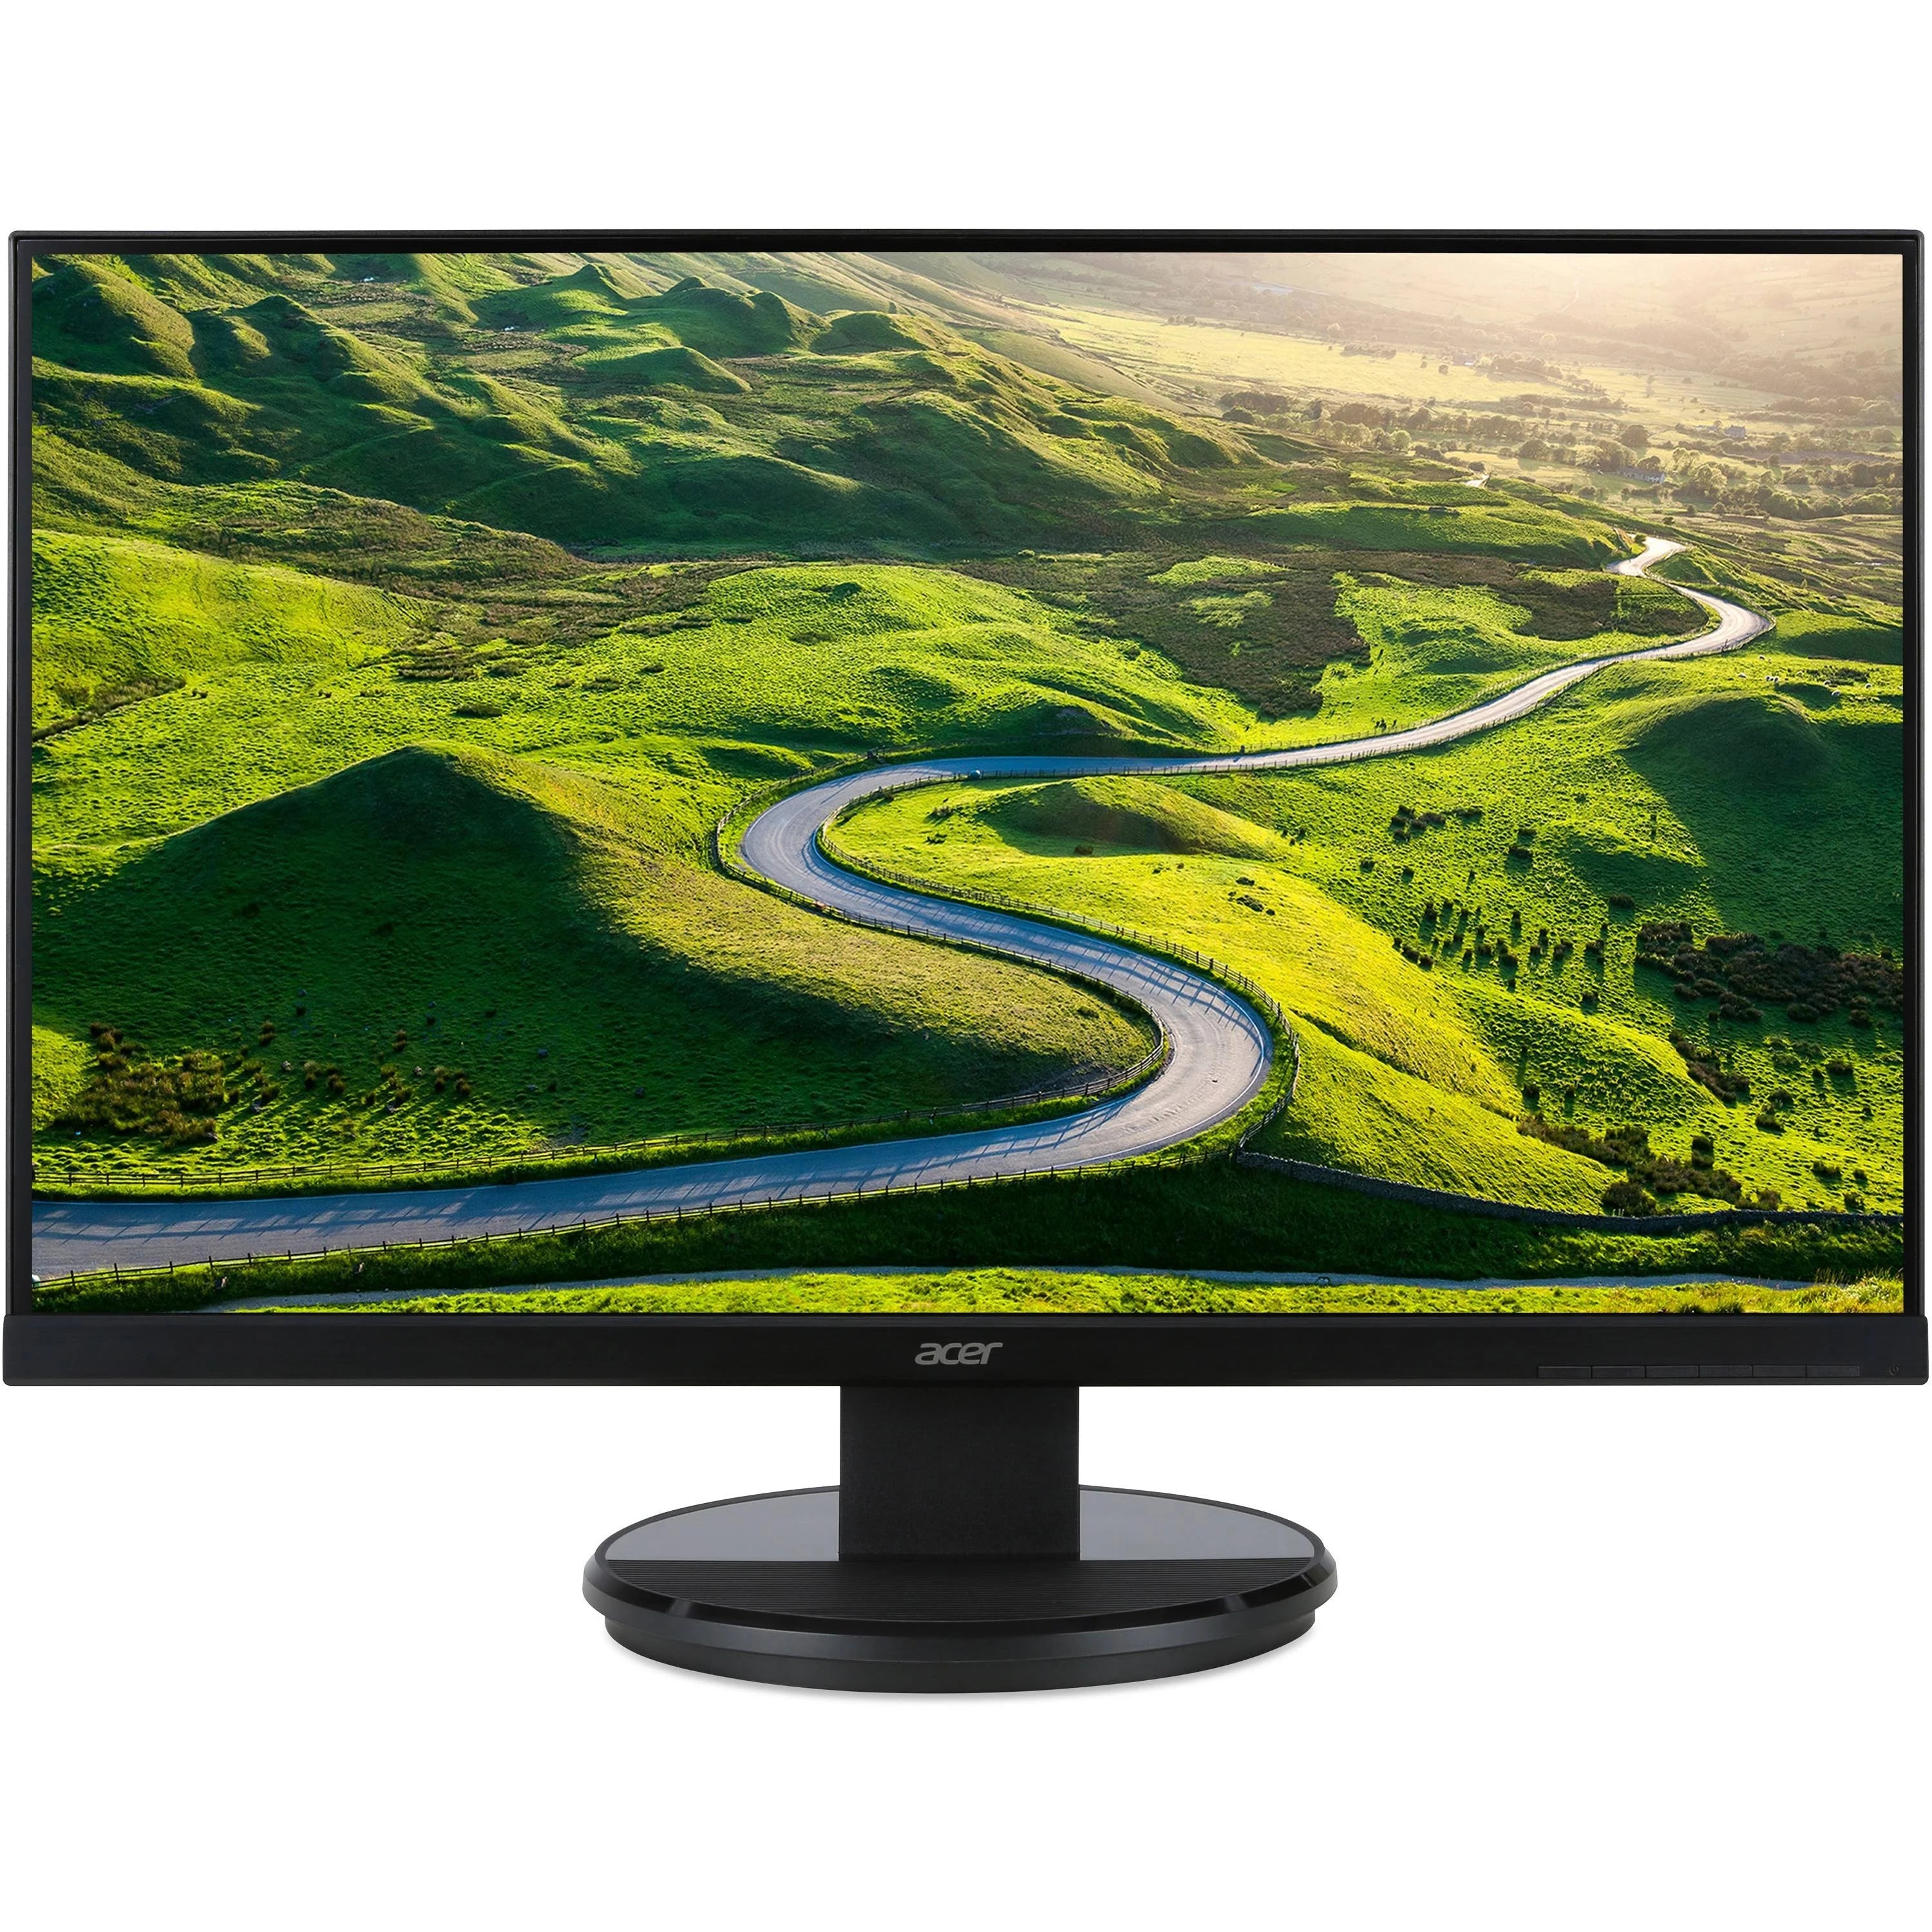 Acer K272HL Widescreen LCD Monitor